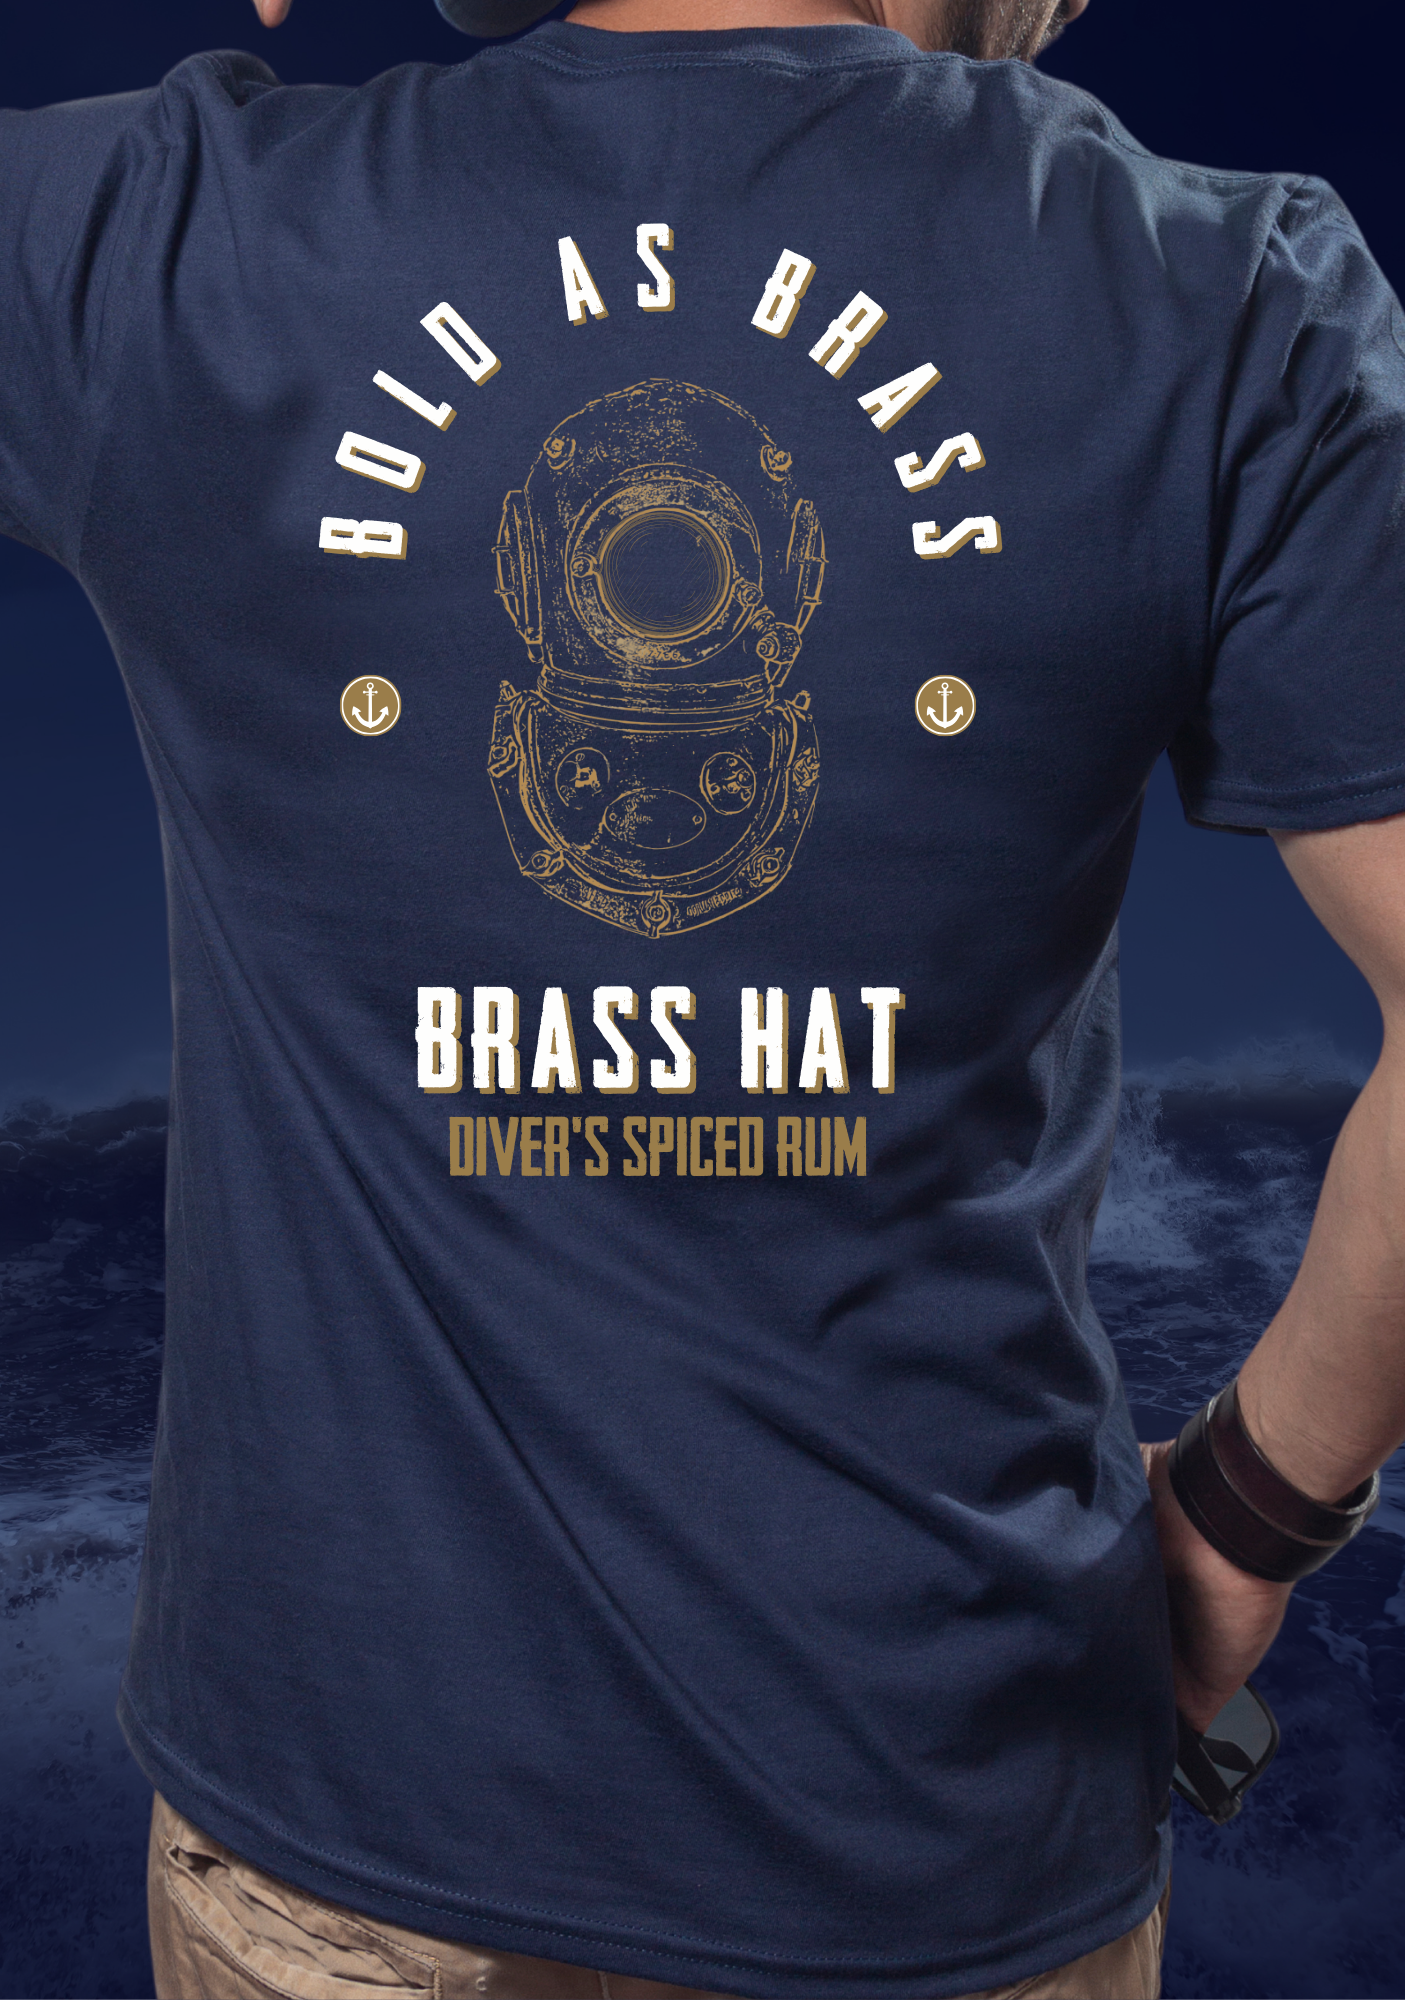 Back view of man wearing T-shirt in navy blue with bold as brass written on it deep sea diver diving helmet logo anchor motifs and Brass Hat Diver's Spiced Rum name